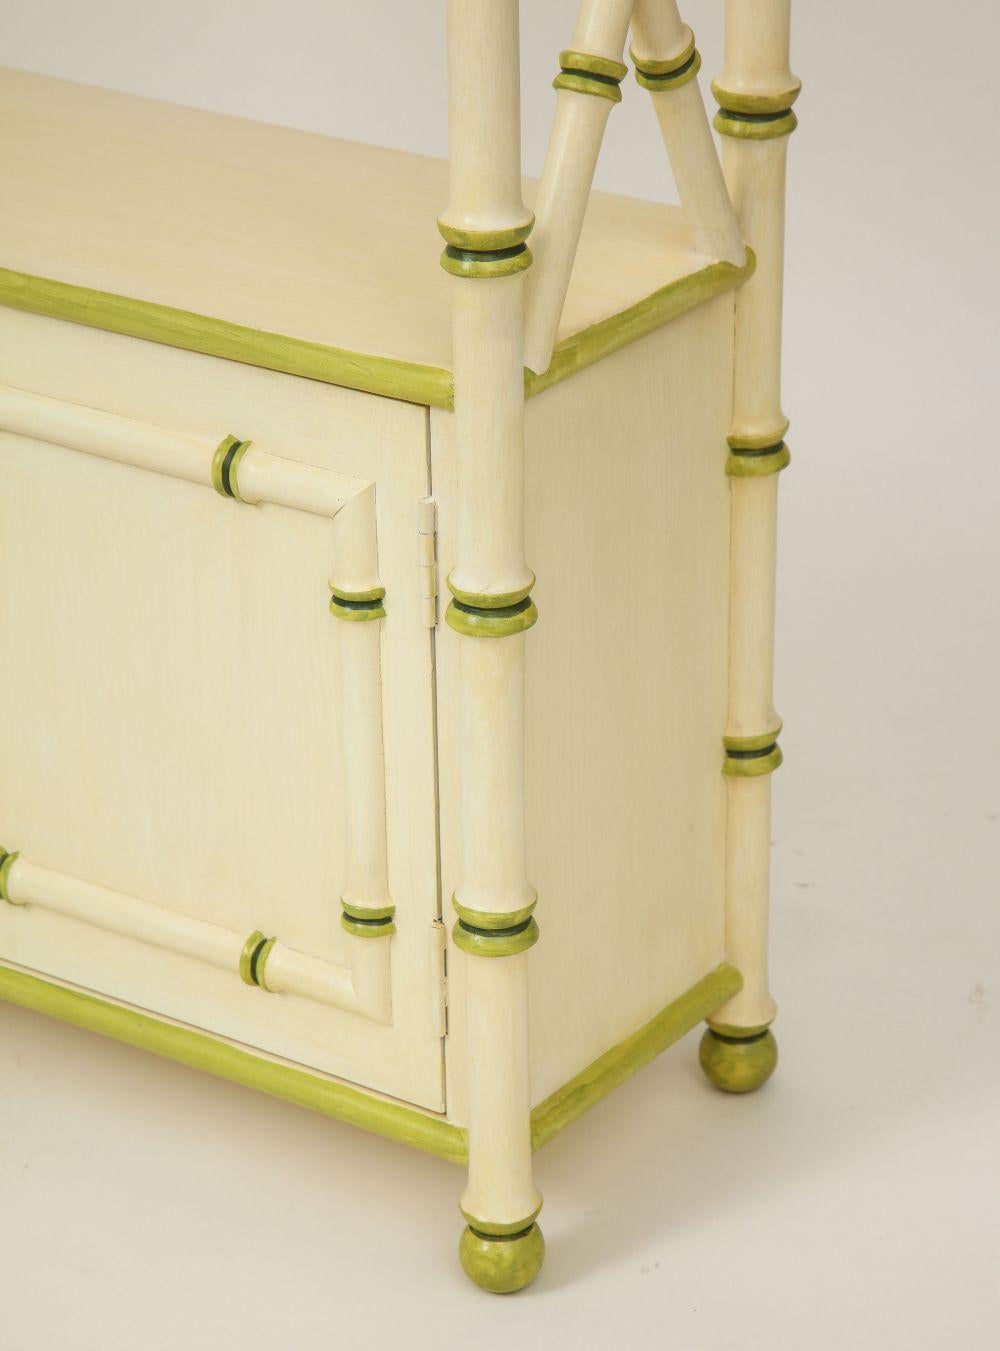 With a shelf over paneled cabinet doors, articulated throughout with stylized bamboo ridges; painted in cream, this one with green detailing. (Other with blue detailing also available)